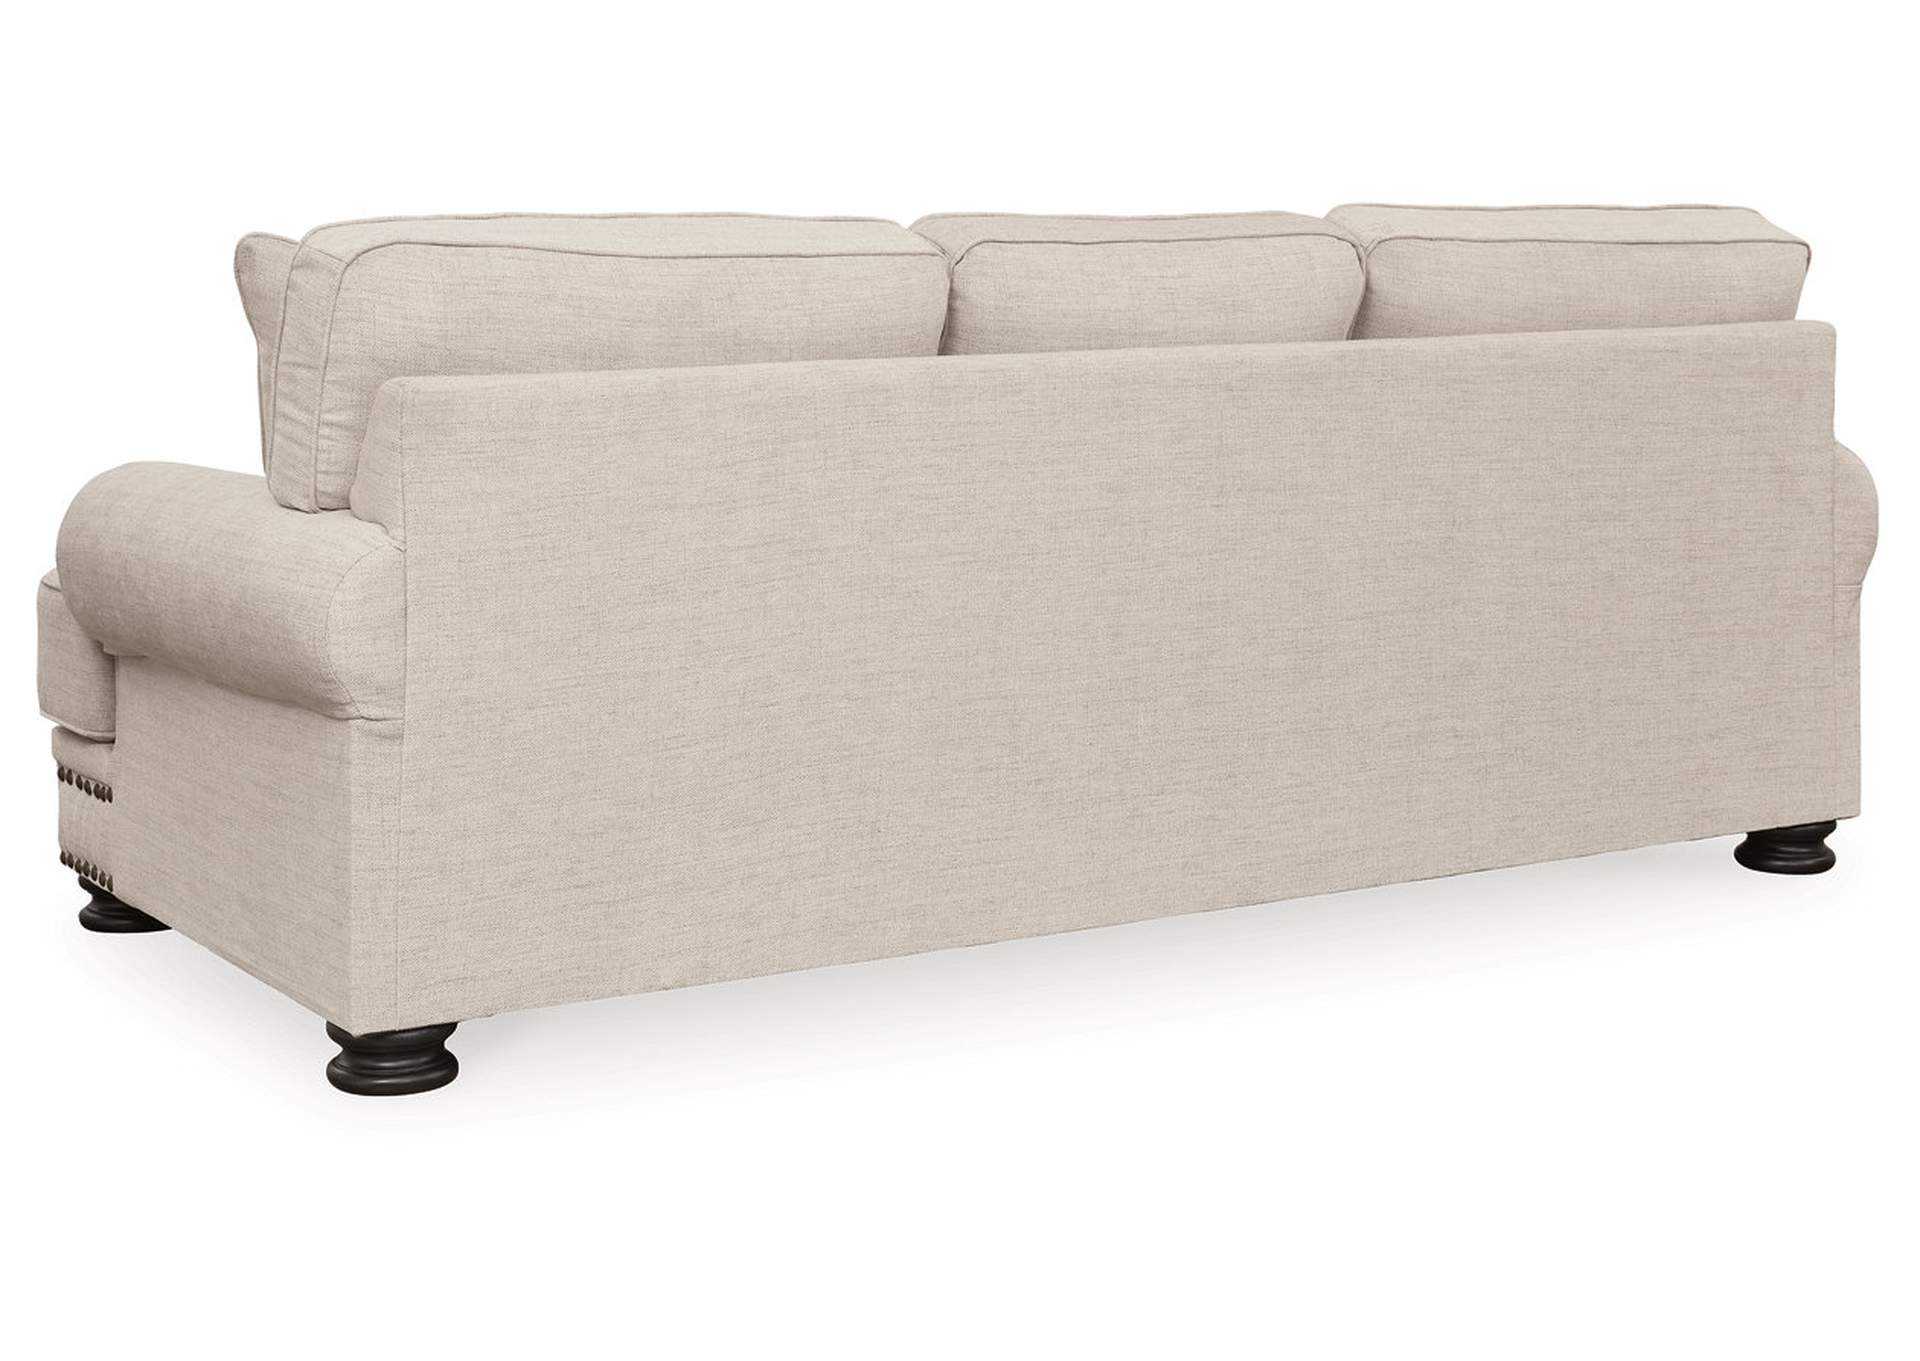 Merrimore Sofa, Loveseat, Oversized Chair and Ottoman,Benchcraft